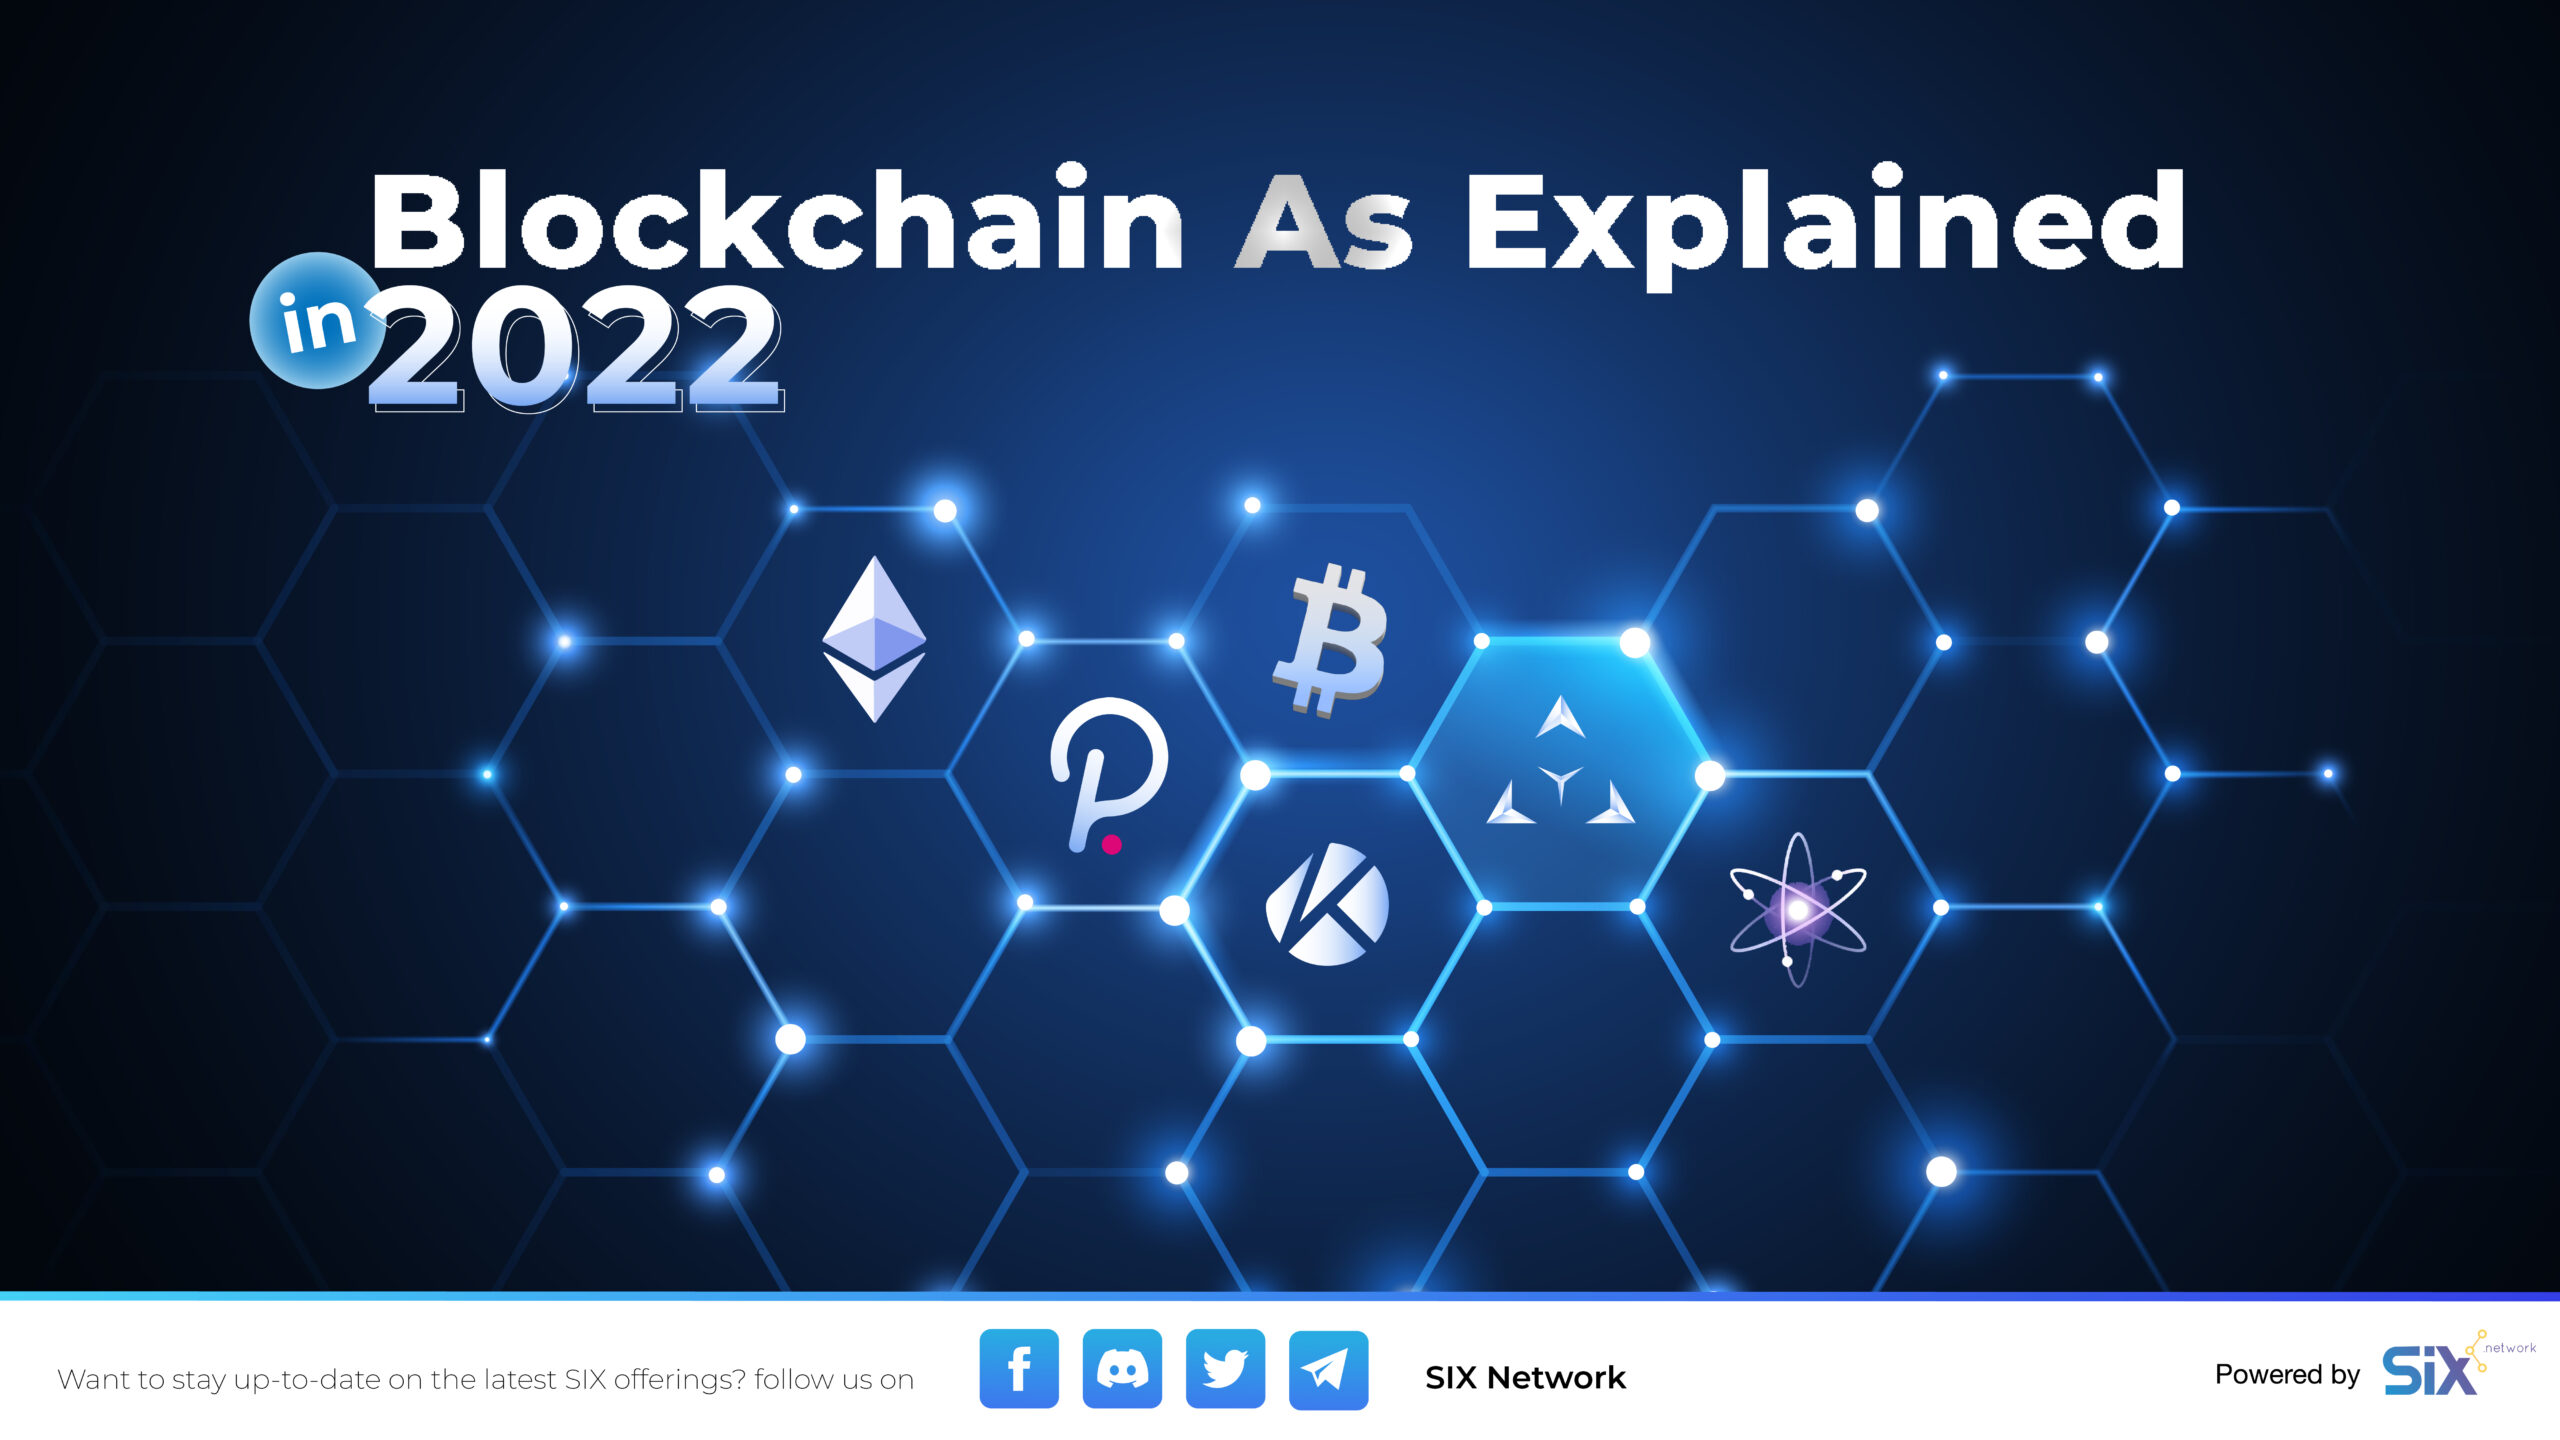 Blockchain as Explained in 2022